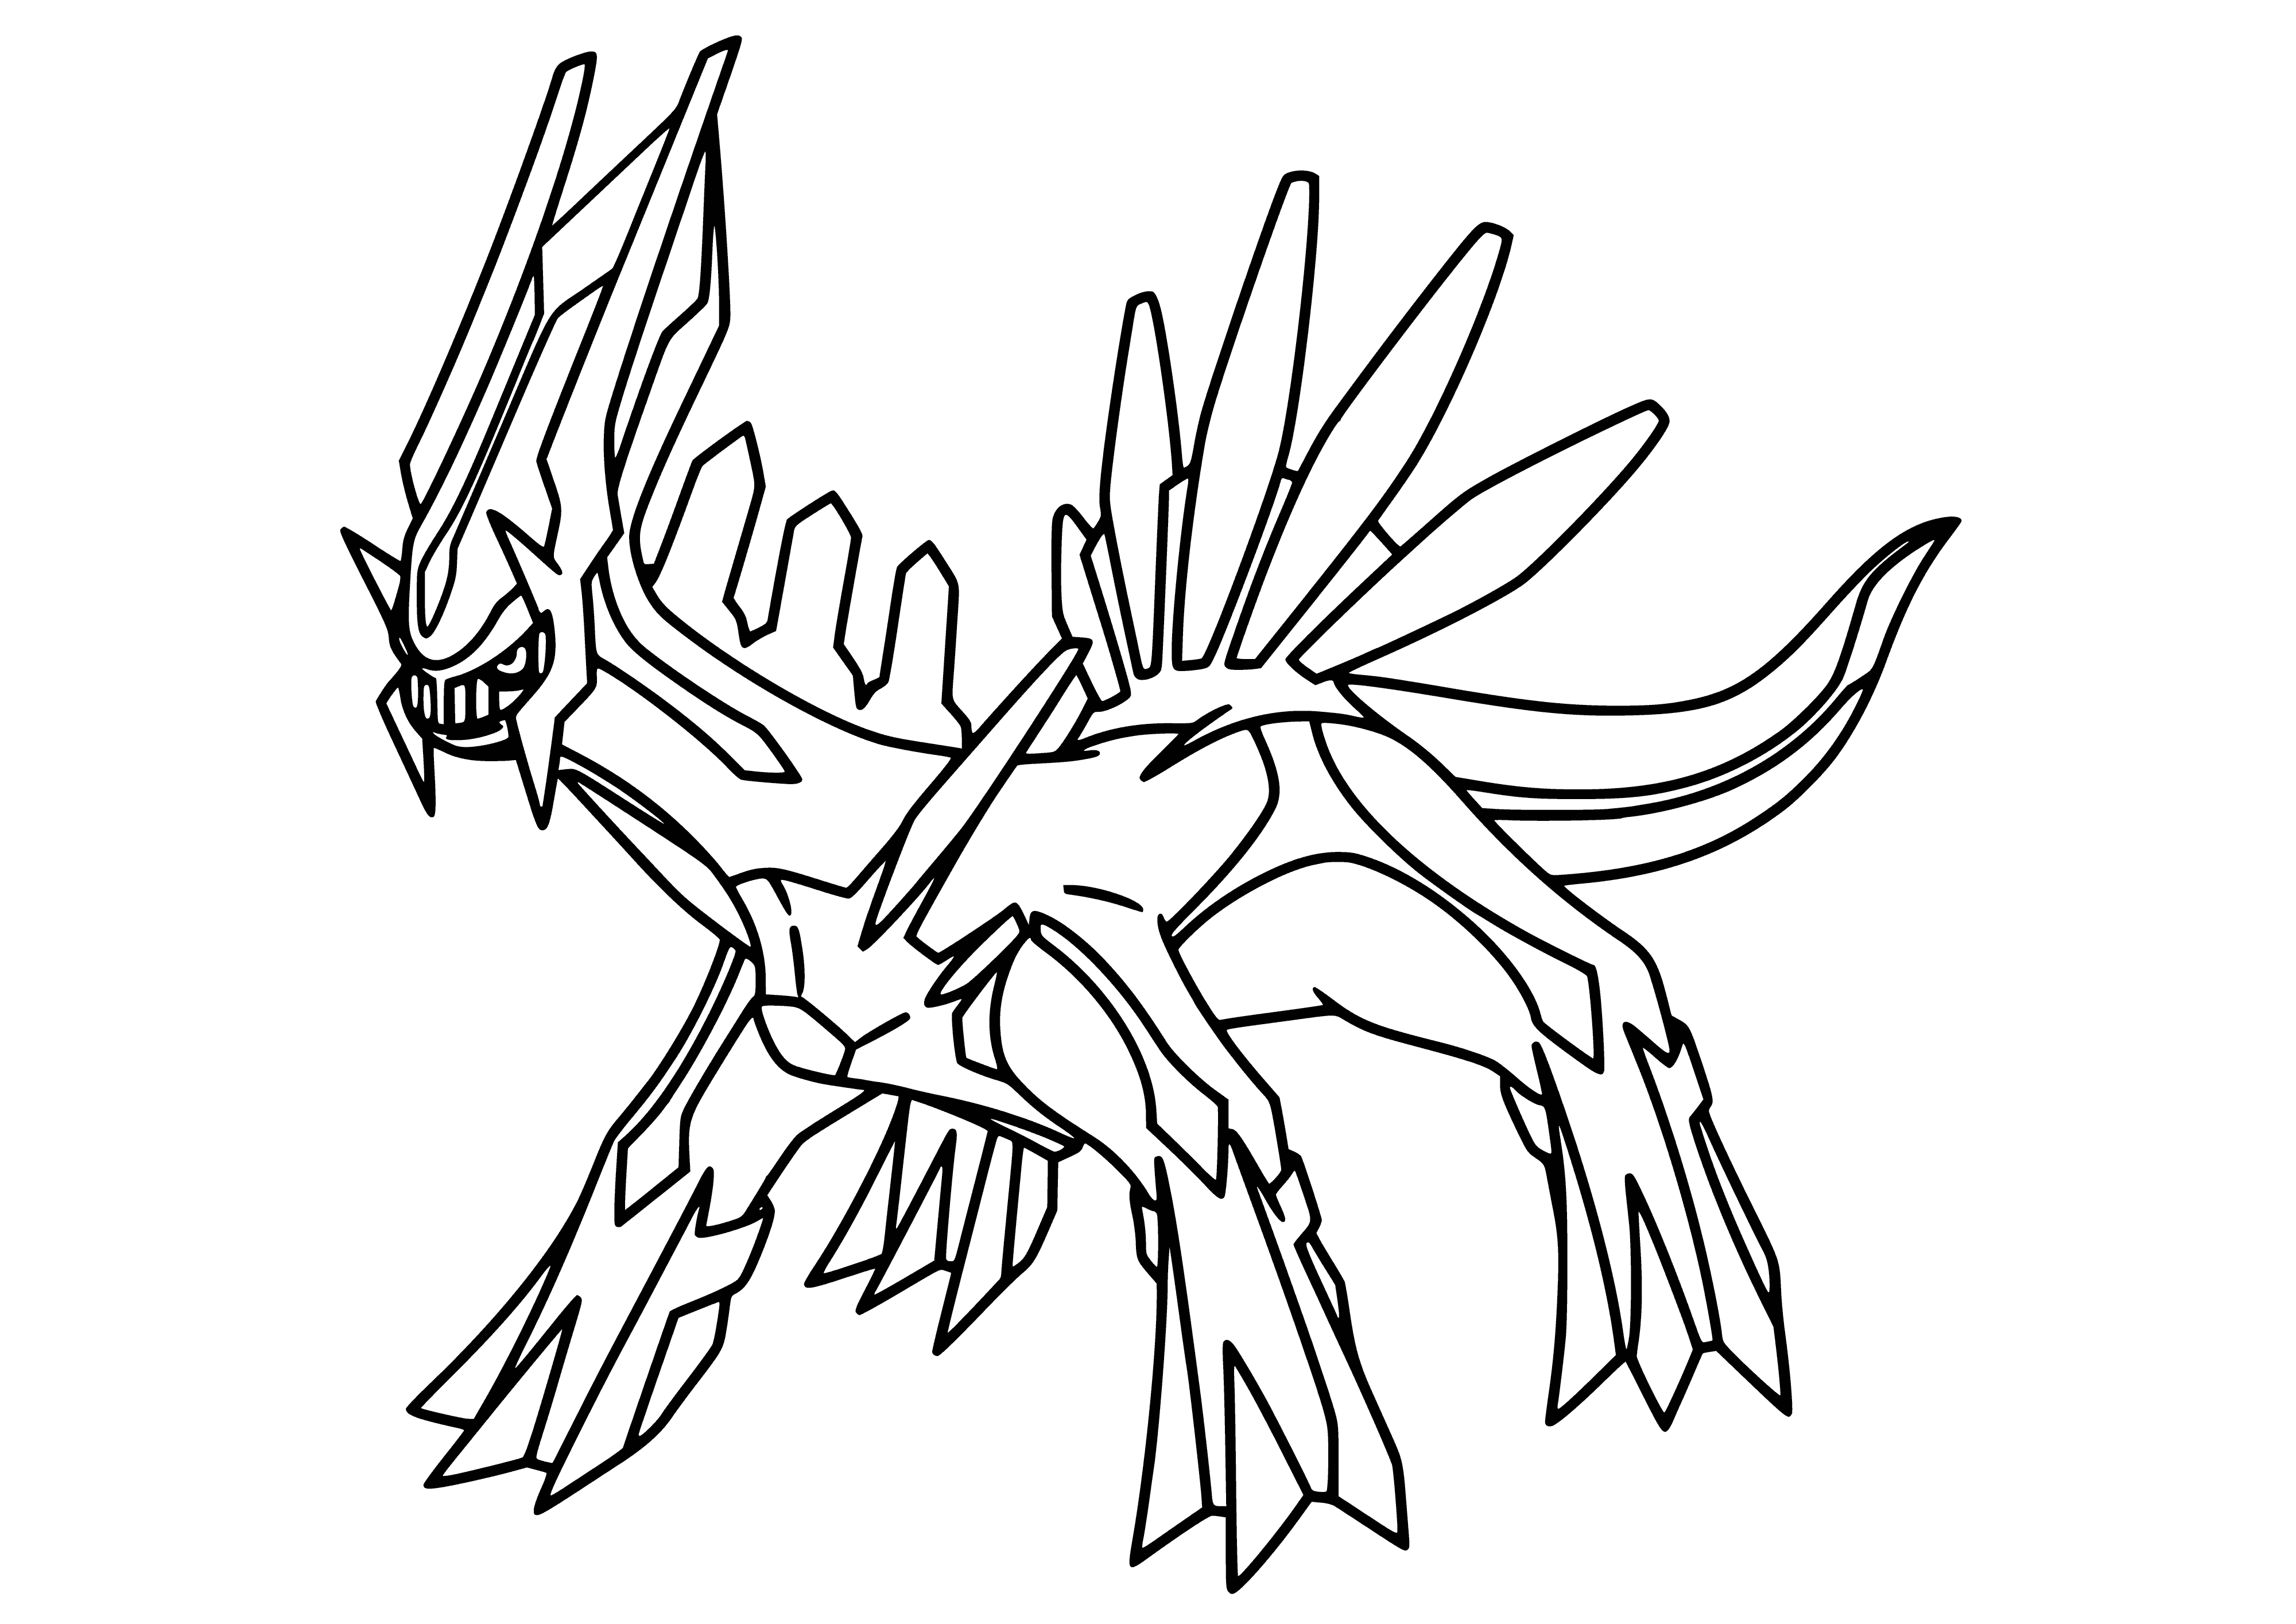 coloring page: Large blue four-legged Pokemon with white underbelly, long neck, triangular head with crystal, red eyes & spikes down back.